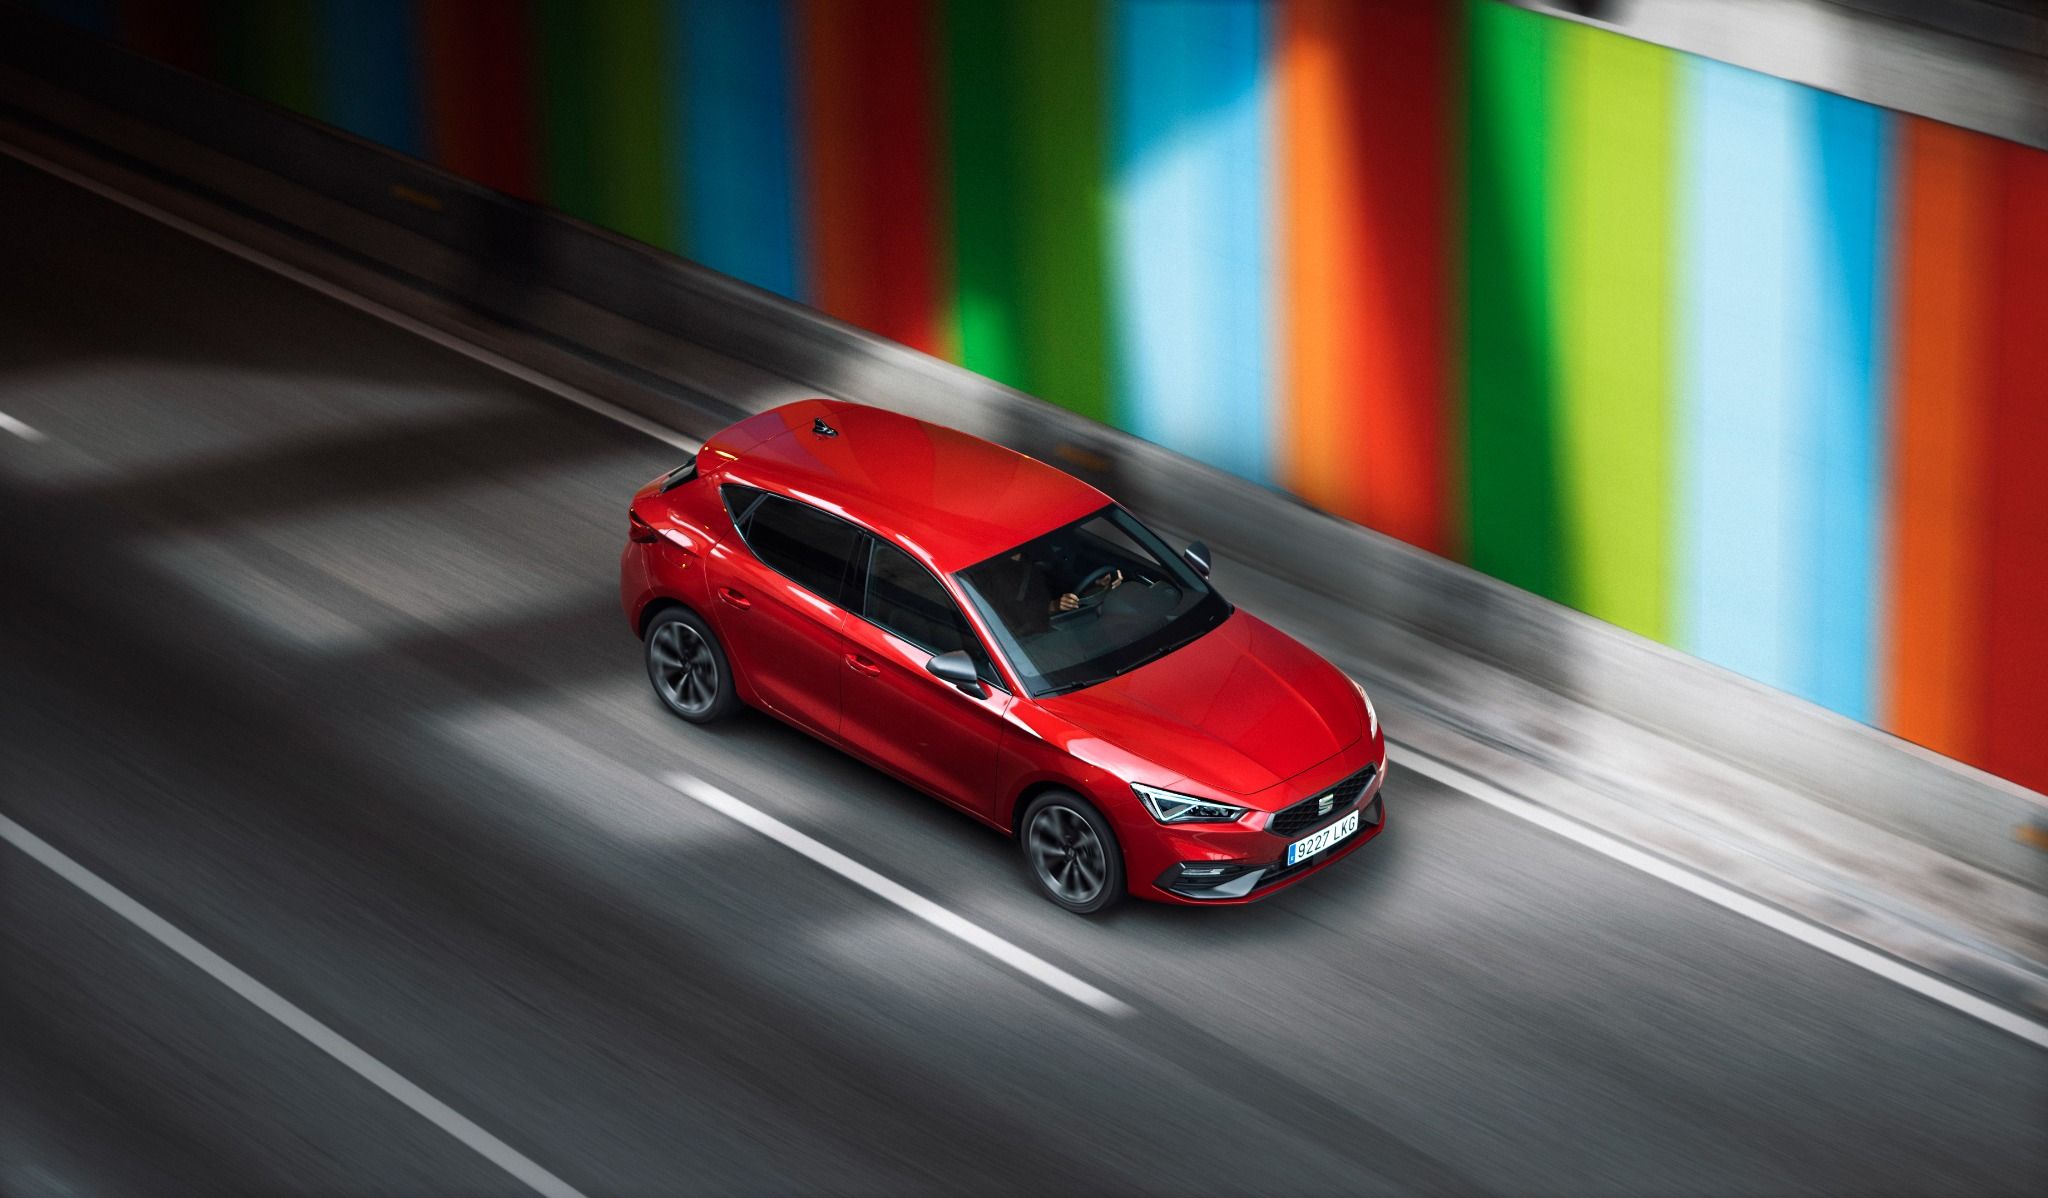 Seat Leon hybrid in red driving next to rainbow wall